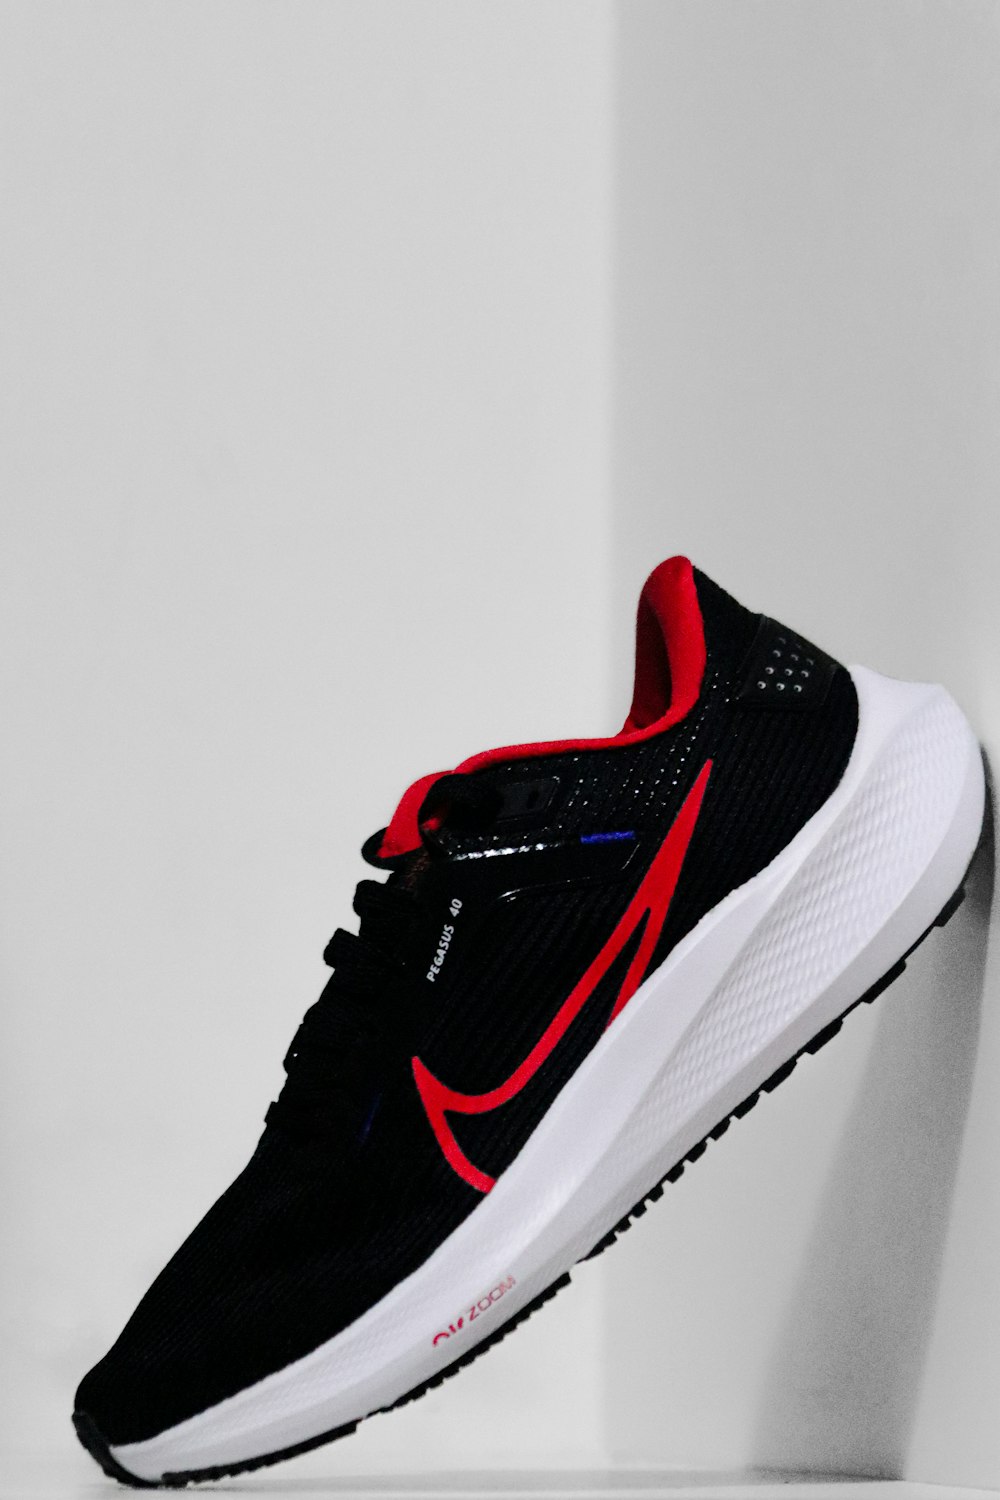 a pair of black and red sneakers hanging on a wall